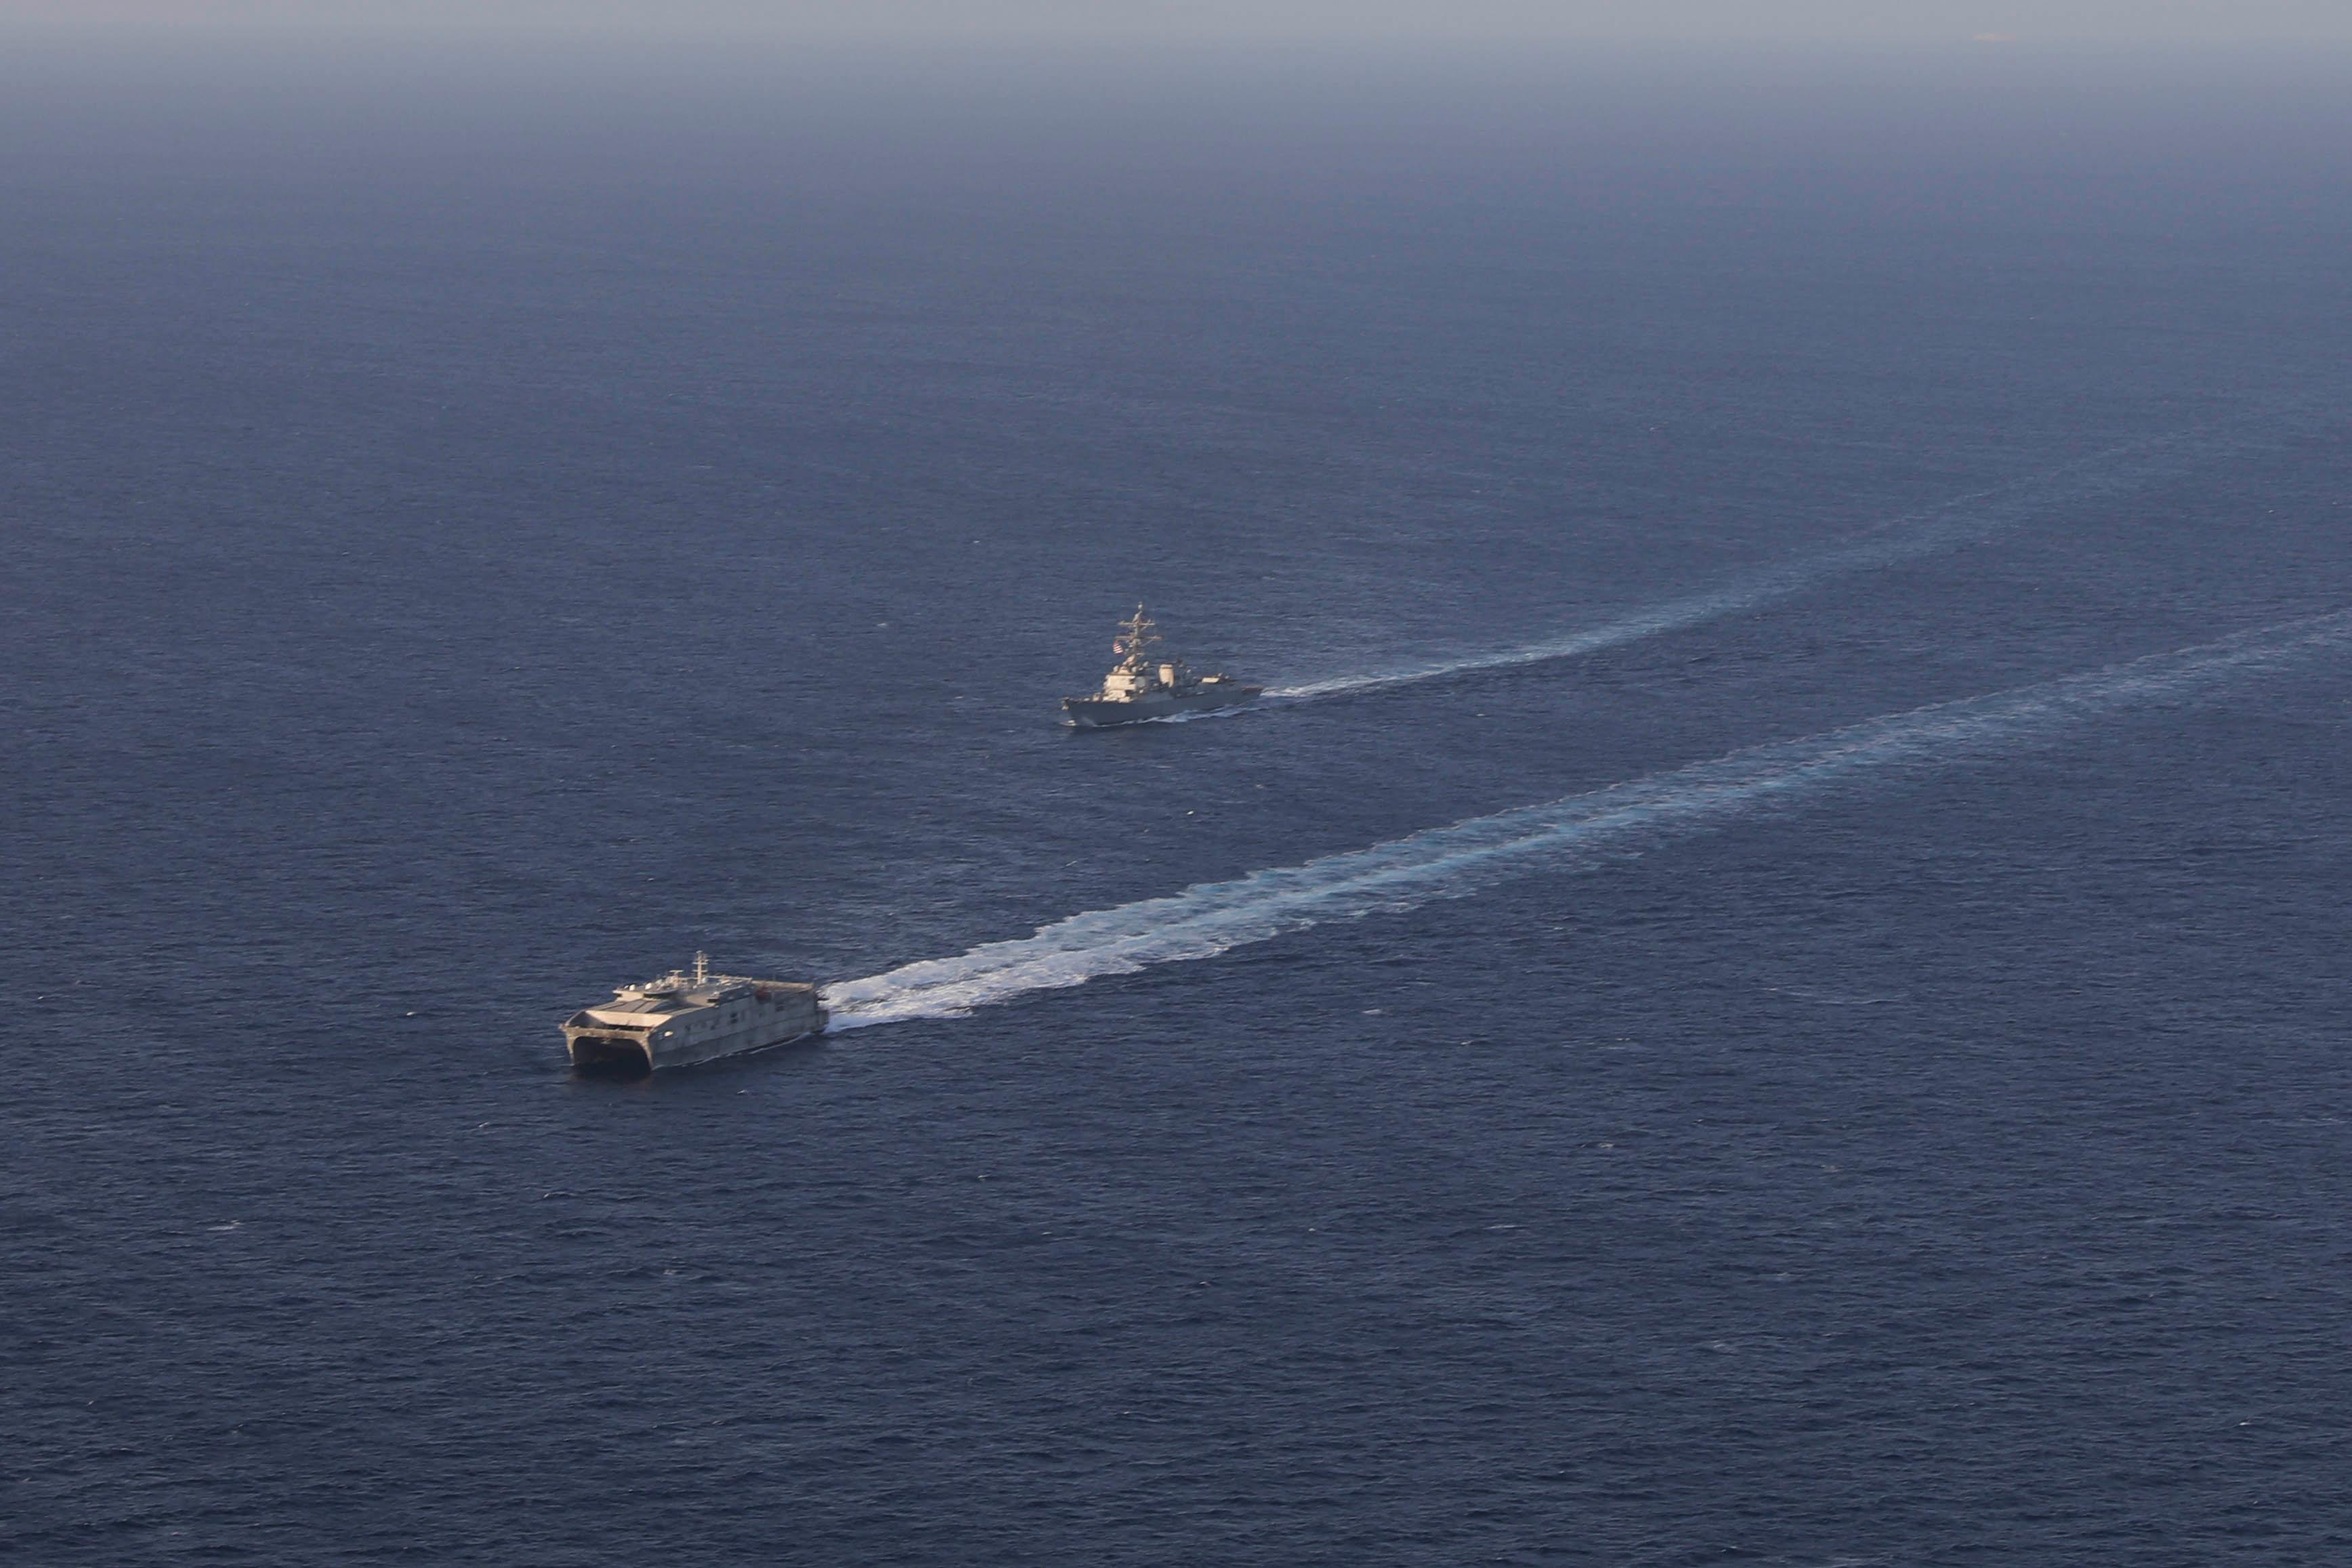 The Arleigh Burke-class guided-missile destroyer USS Truxtun (DDG 103), left, sails behind the Military Sealift Command expeditionary fast transport ship USNS Brunswick (T-EPF 6) in the Red Sea, May 1, 2023, while supporting the Department of State's efforts to evacuate U.S. citizens and others who have requested departure from Sudan.